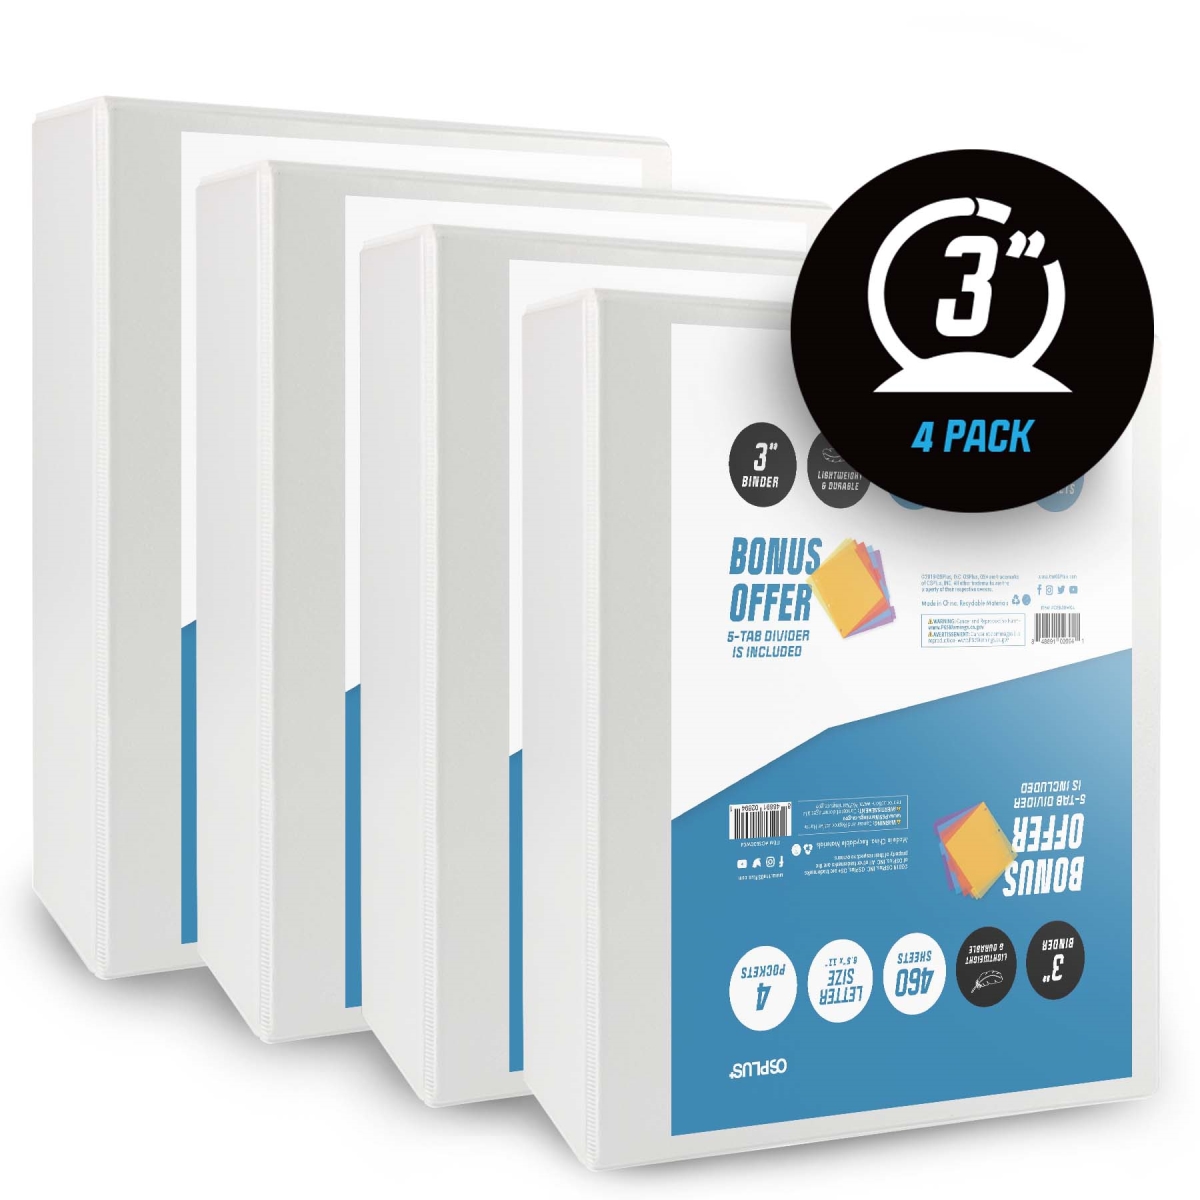 Osb30w04 3 In. O-ring Simple Binder With Bonus 1 Set Divider Included, White - Pack Of 4